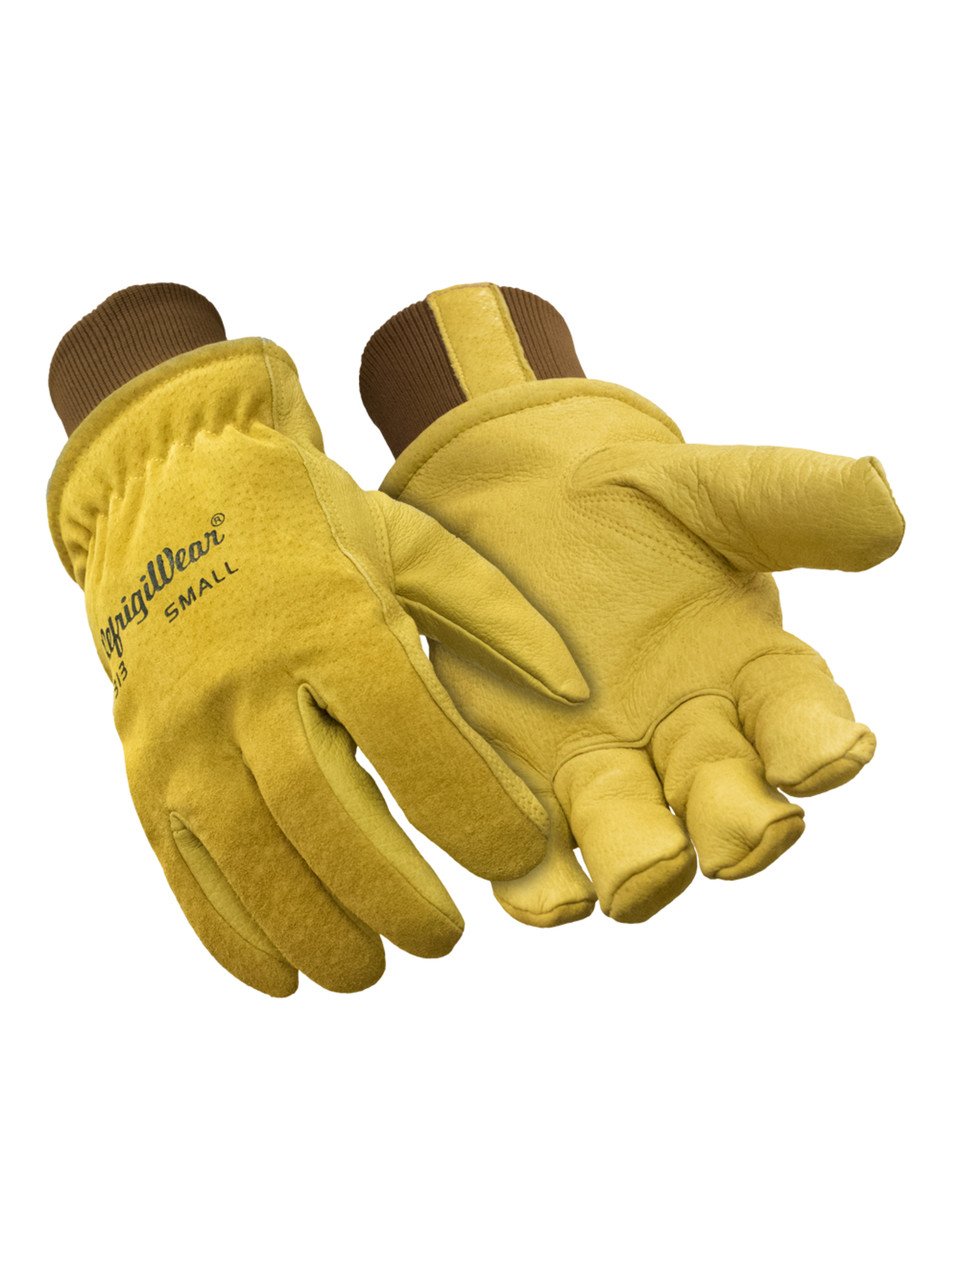 RefrigiWear Insulated Goatskin Leather Gloves from GME Supply